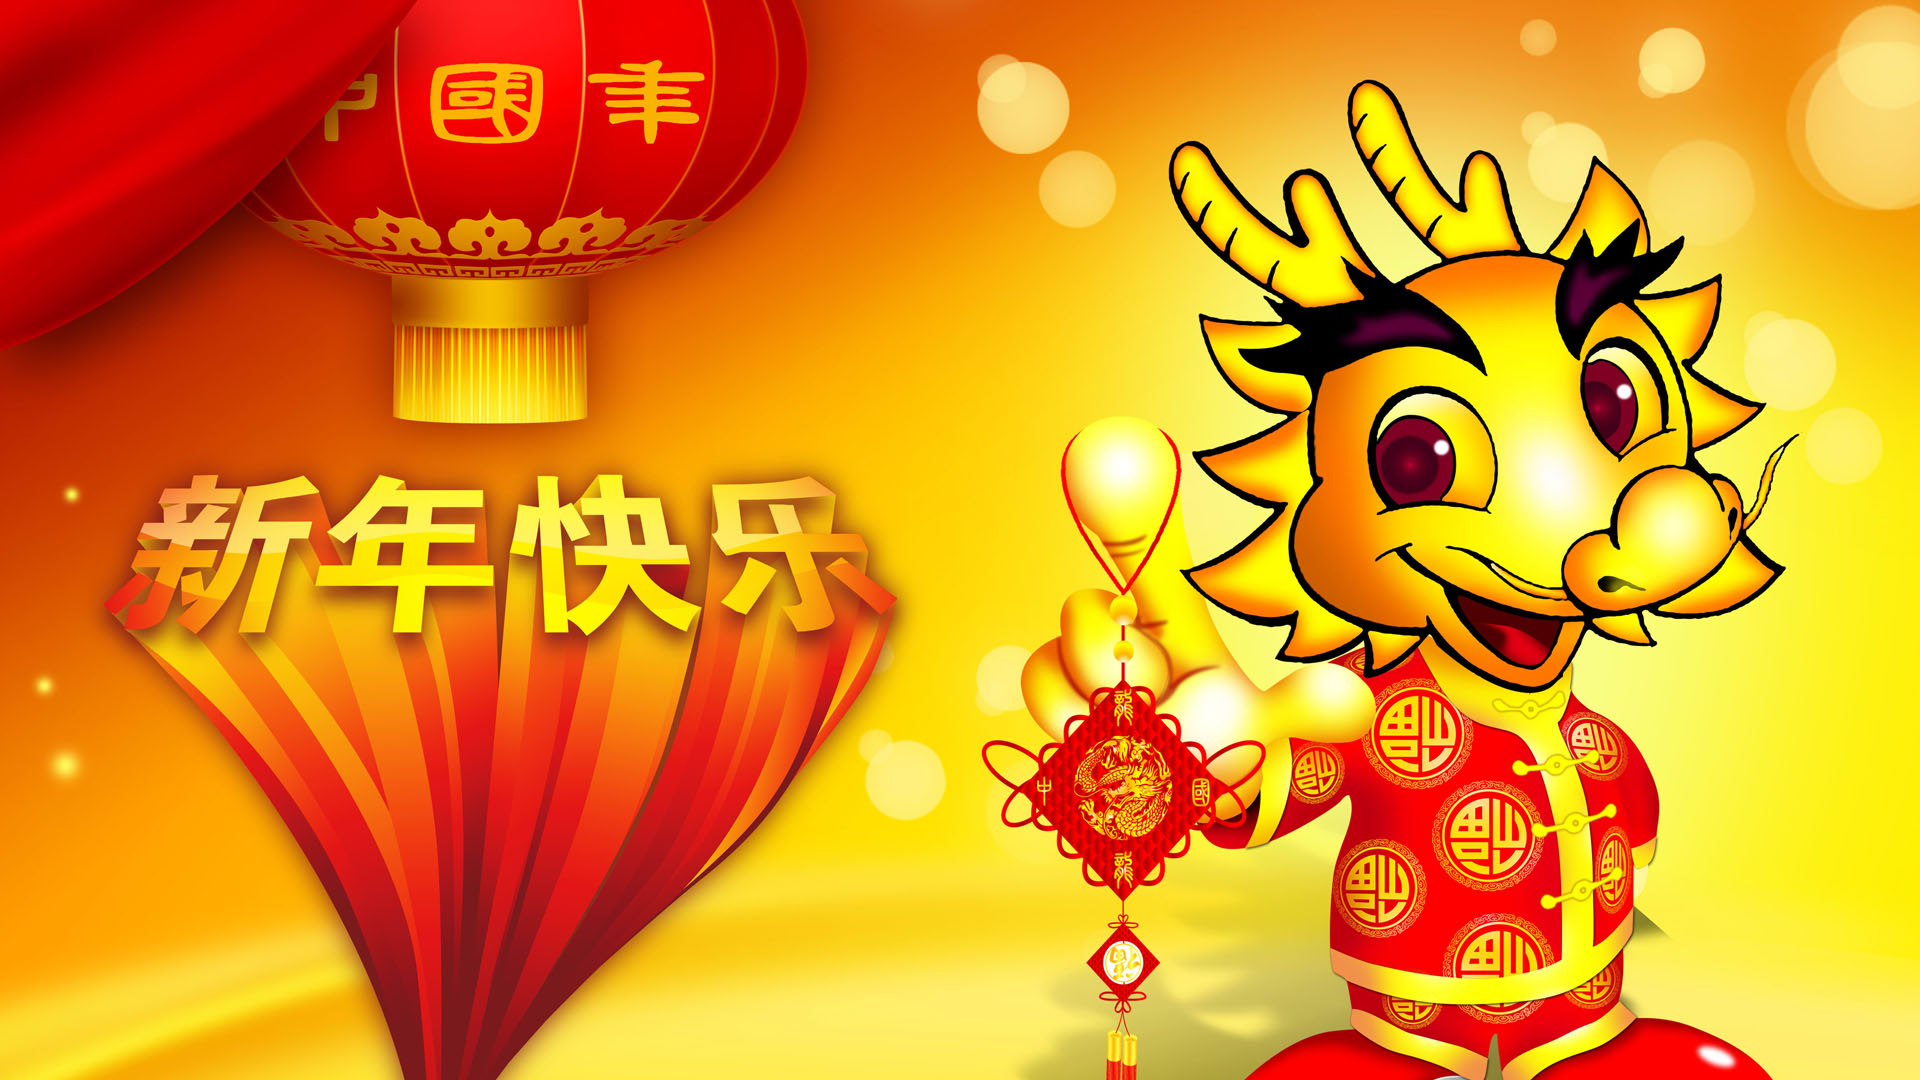 Happy New Year 2012 Renchen Dragon Year Chinese Year Desktop Wallpaper